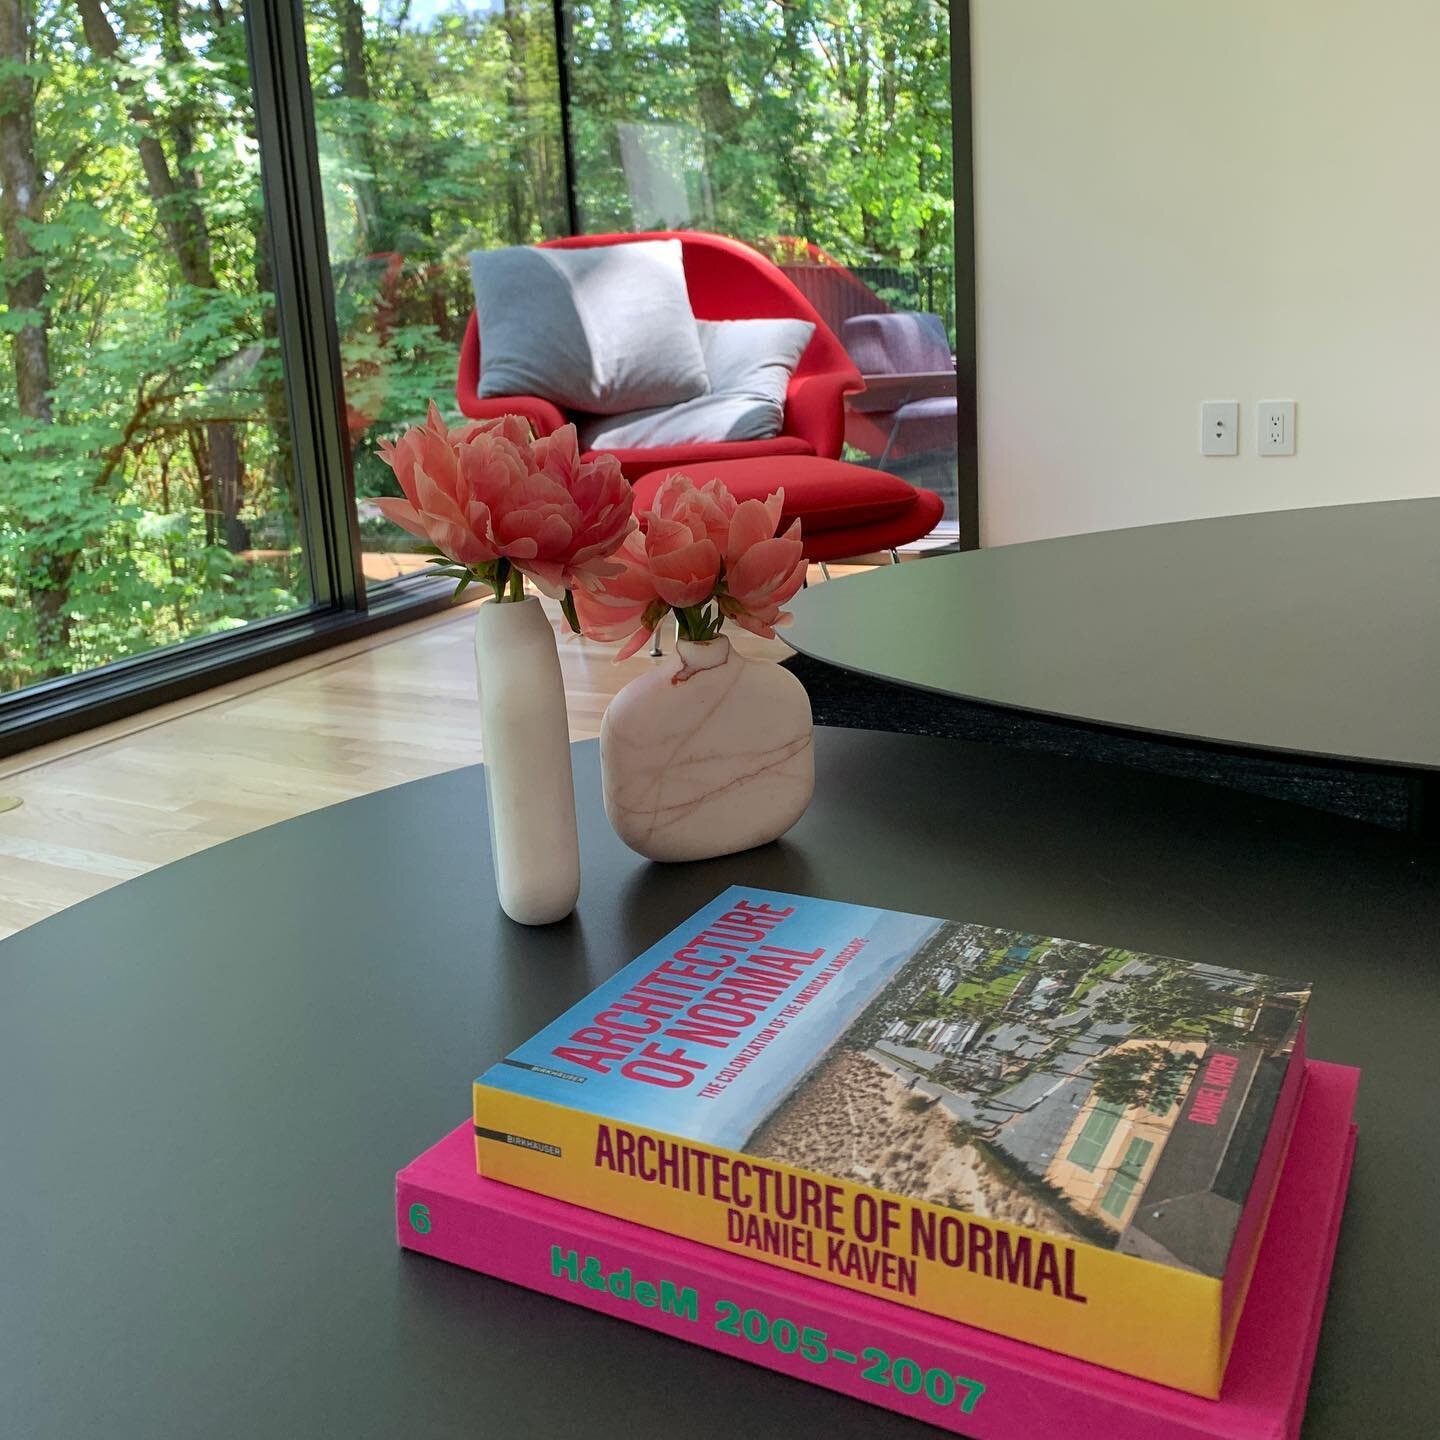 AON on the coffee table at @williamkaven's recently completed Royal II Residence.

#architectureofnormal #booksinthewild #danielkaven #williamkavenarchitecture #architecture #art #design #americanarchitecture #photography #culture #historyofarchitect